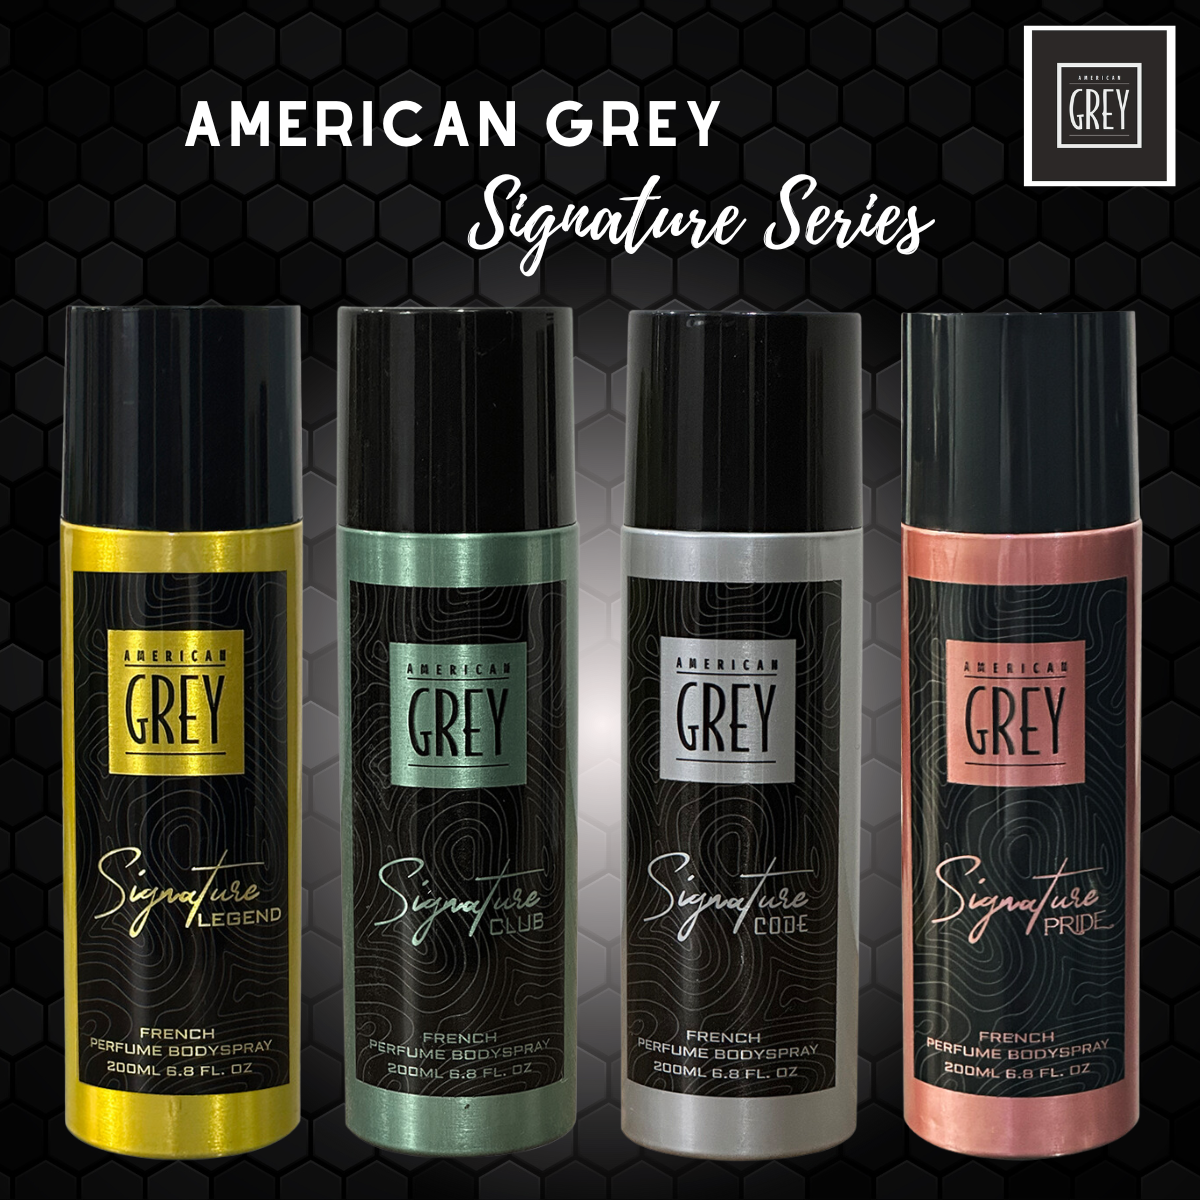 signature series, american grey signature series, signature deos for men, amplify your style with american grey deos, american grey deos, american grey deos for men, men deodorant range, men grooming kit, men grooming deos, signature legend, signature code, signature club, signature pride, affordable premium fragrance, premium fragrance at reasonable price, cheap alternative of escada moon sparkle, dupe of Sauvage Dior, dupe of mont blanc legend, dupe of drakkar, men grooming essential, top rated men deo